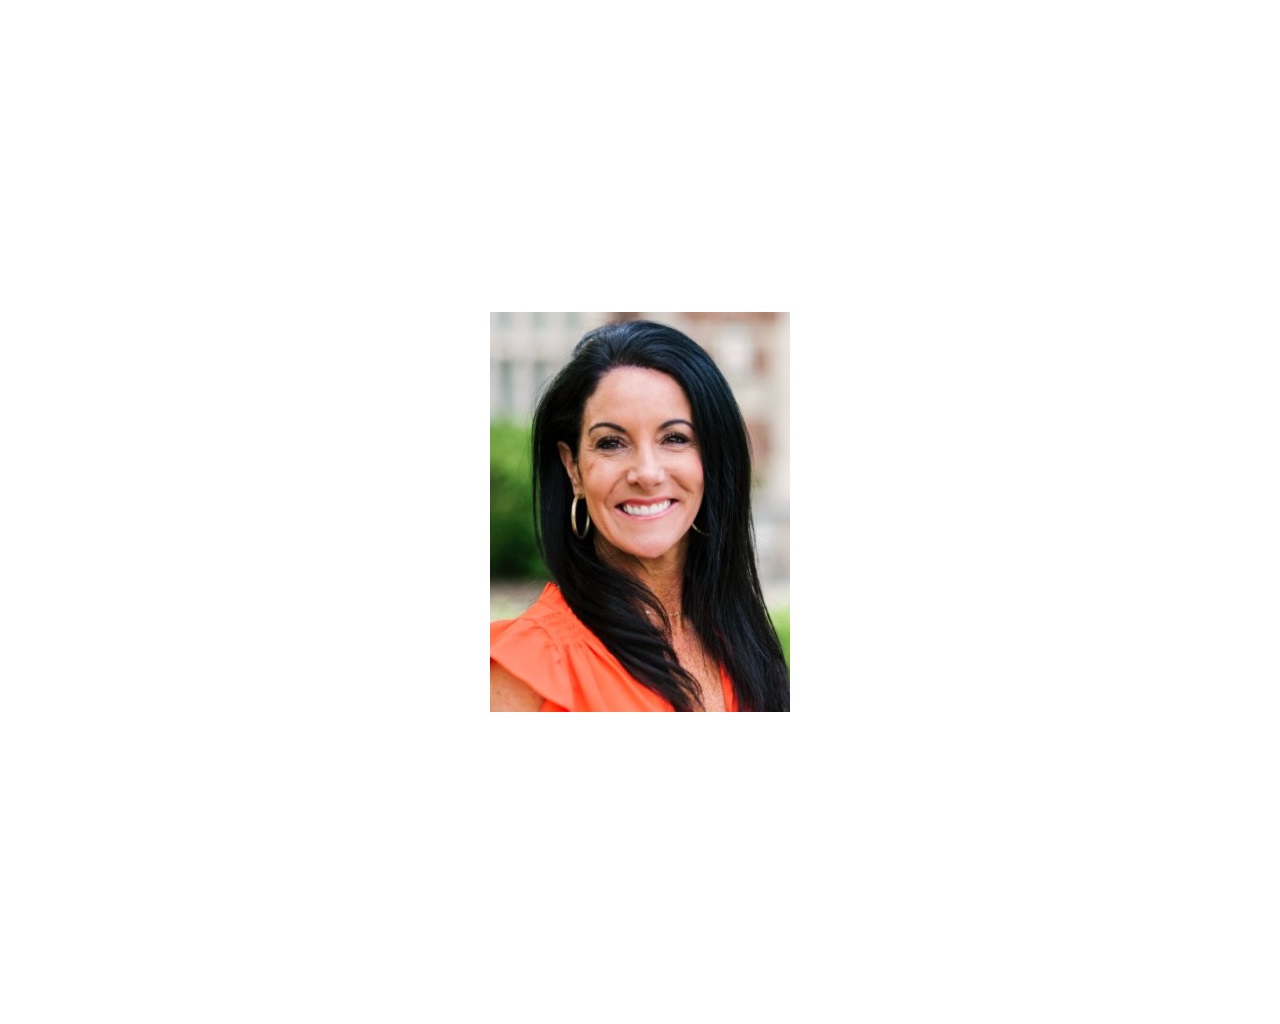 Julie DuPree, Owner, DuPree Homes; Knoxville, TN